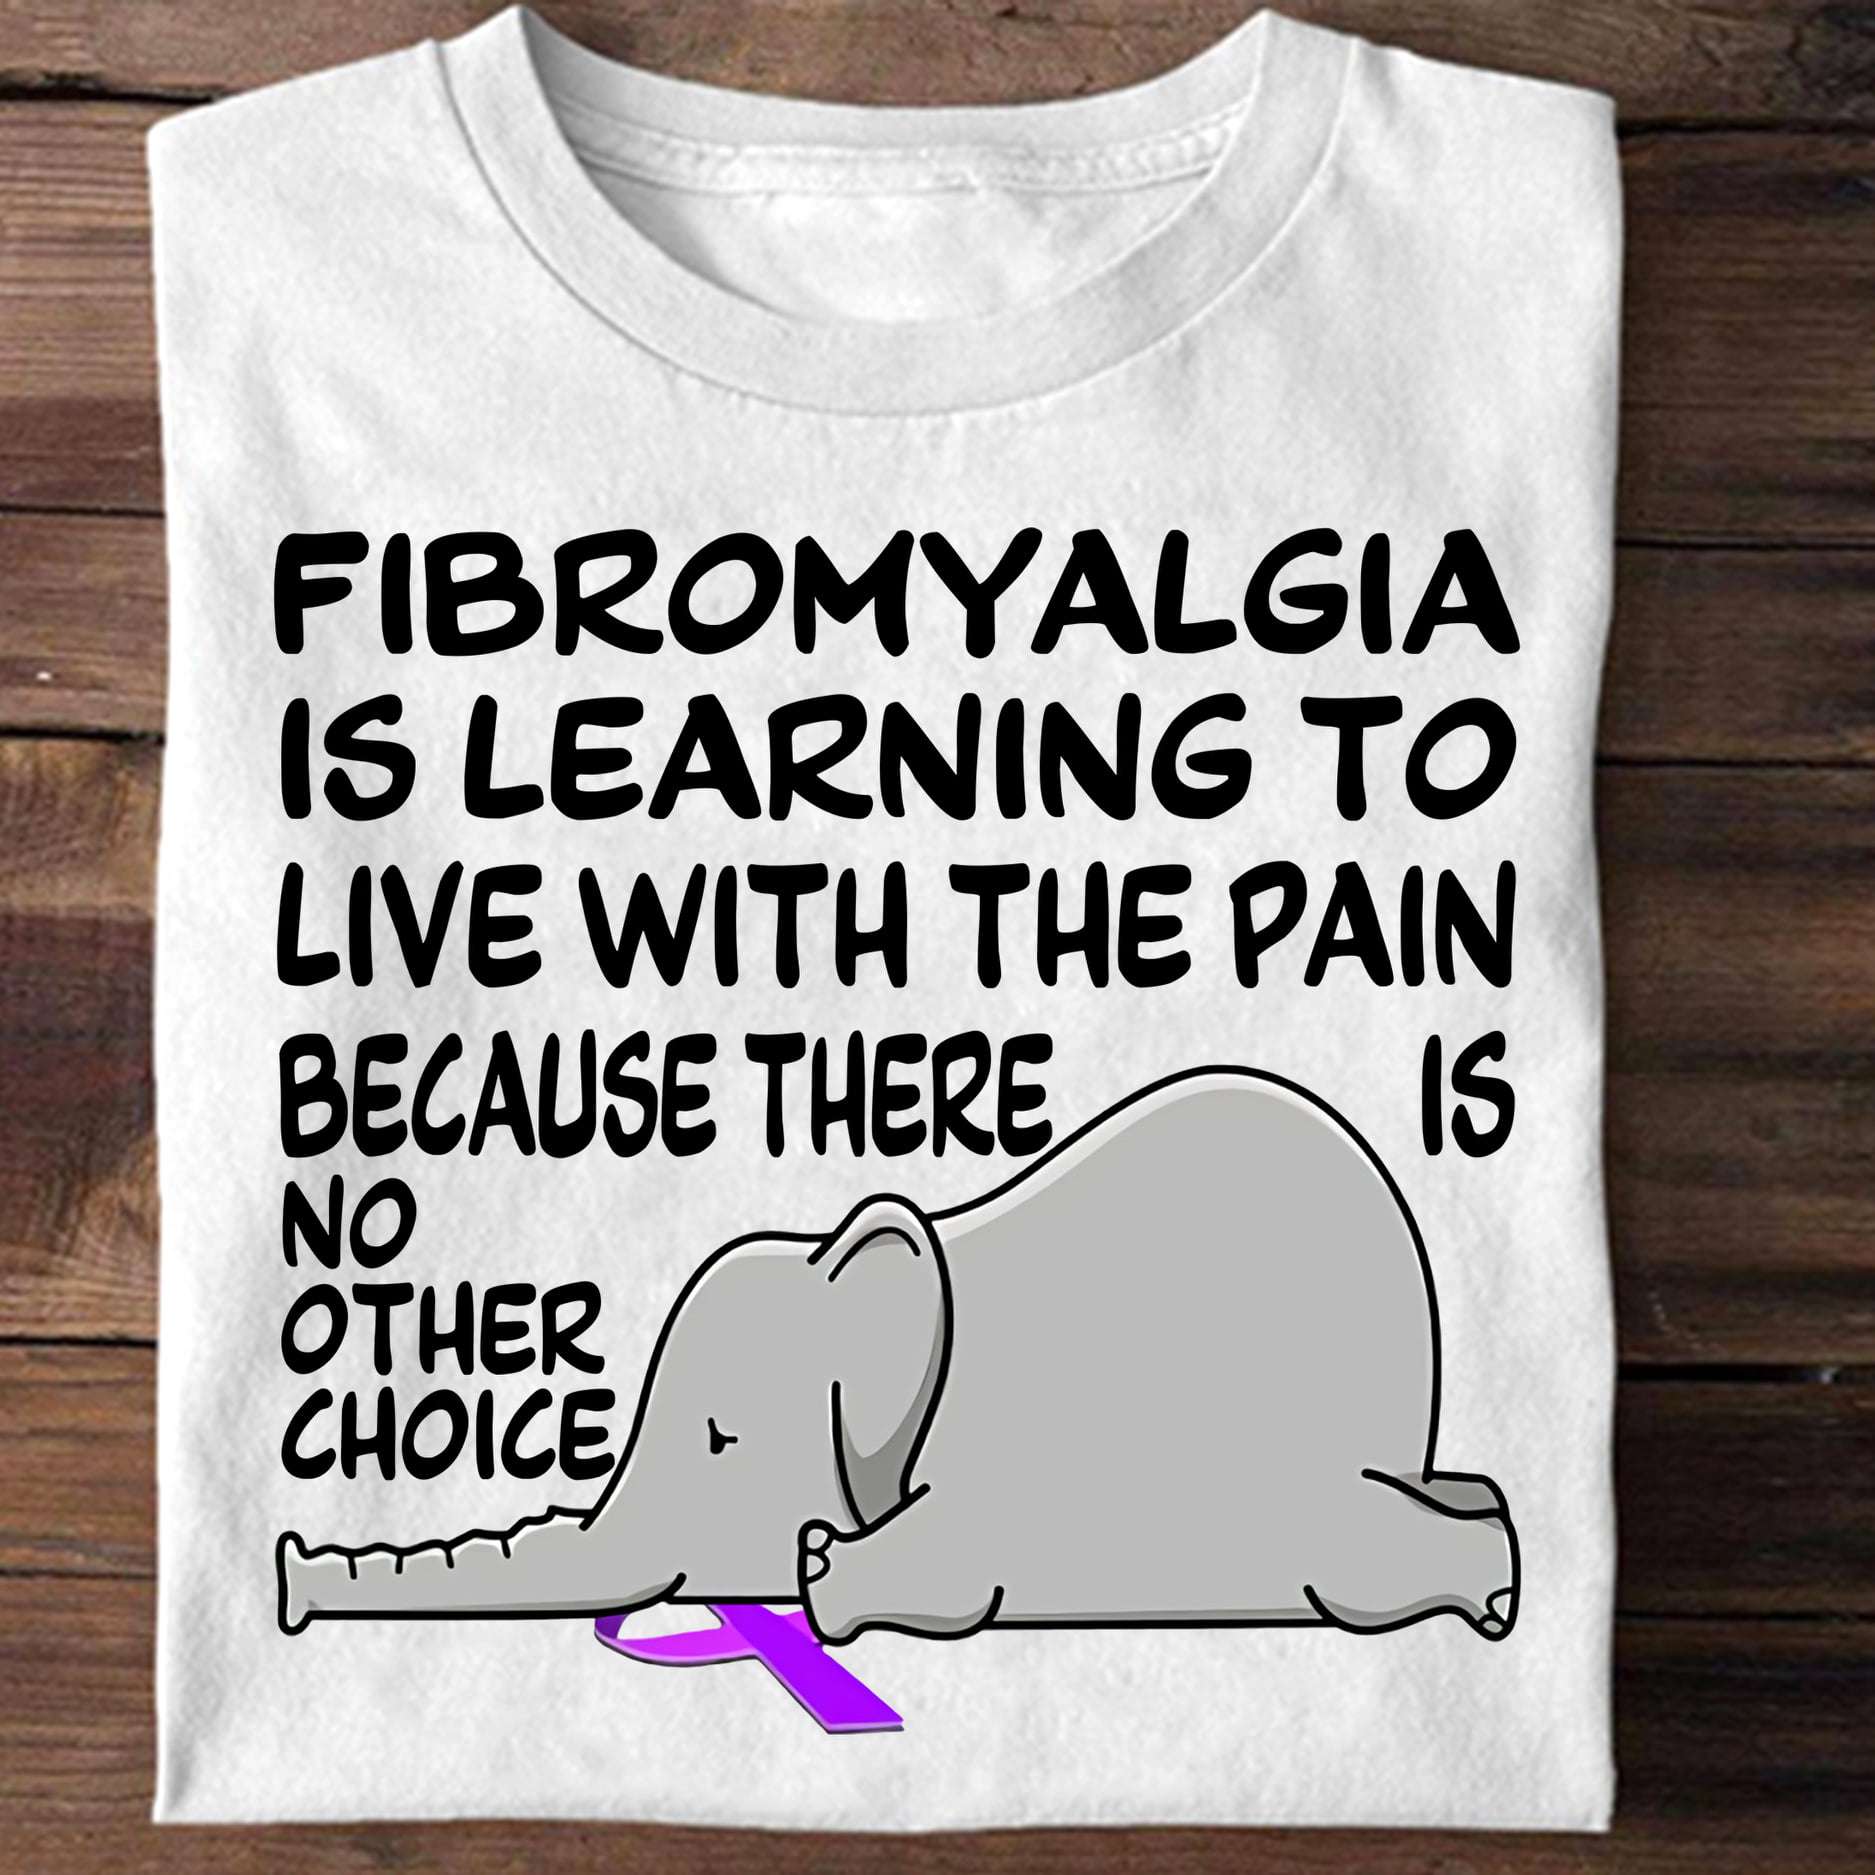 Fibromyalgia Elephant - Fibromyalgia is learning to live with the pain because there is no other choice